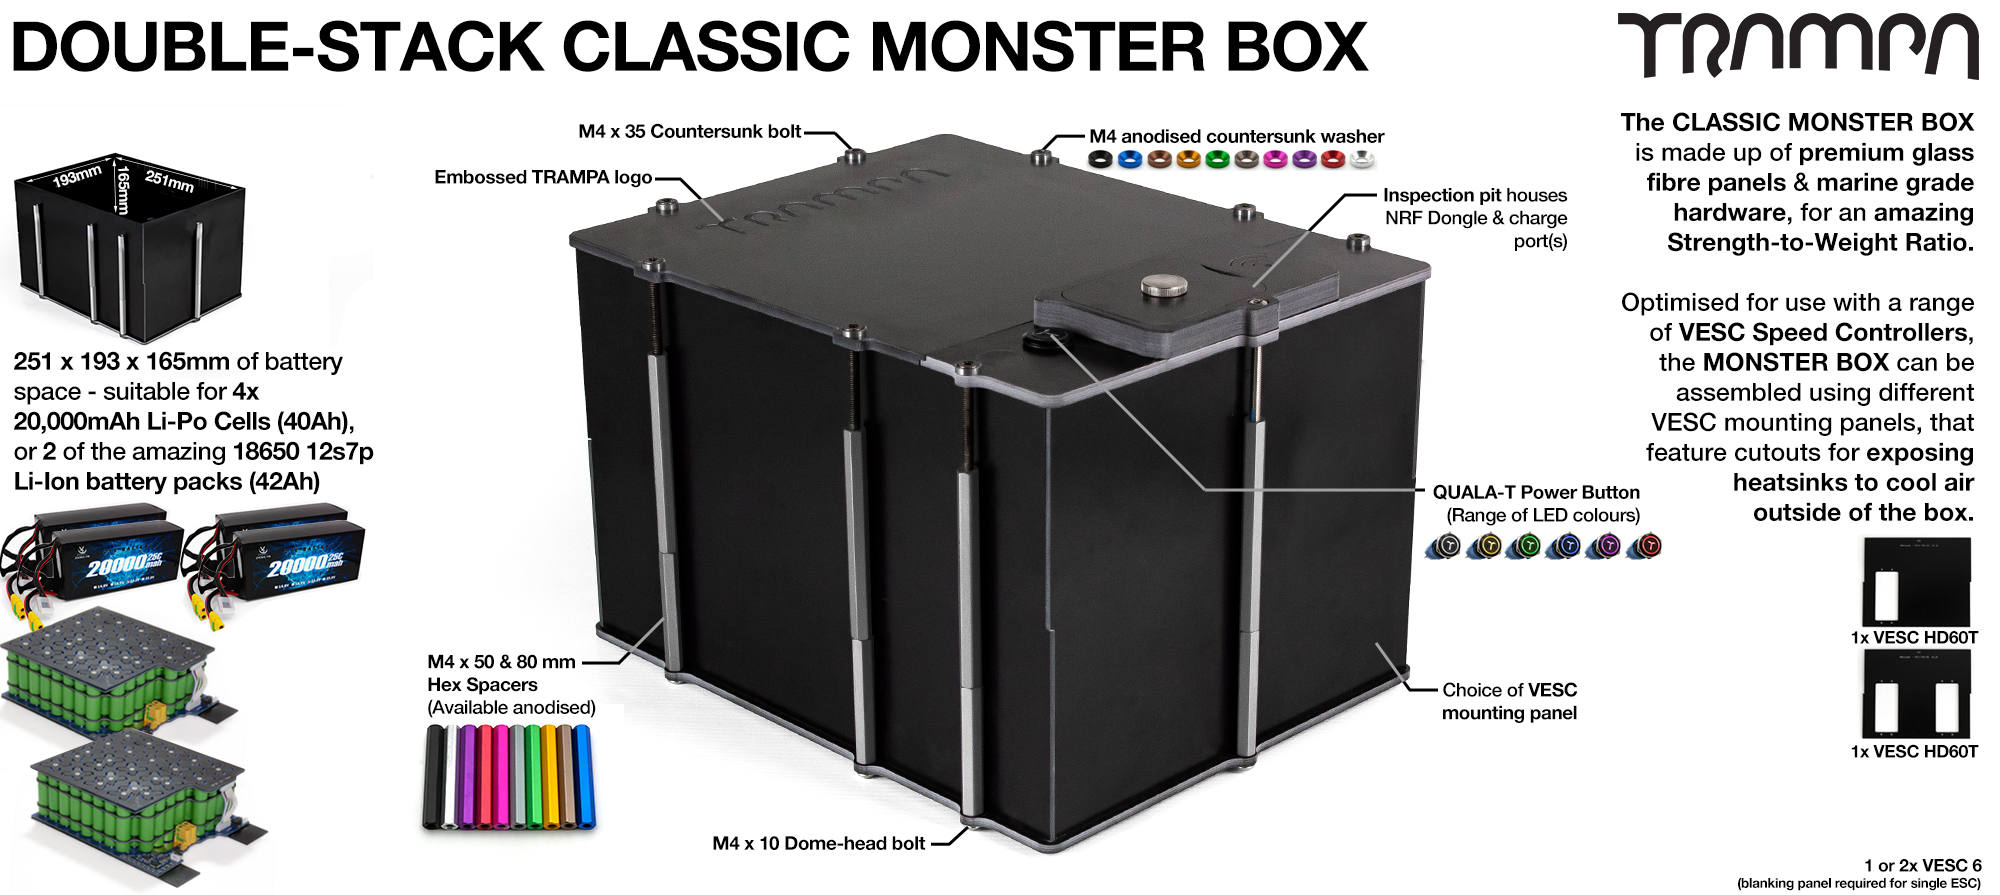 Classic MONSTER Box MkV DOUBLE STACKER - with NO VESC MOUNTING Panel fits 168x 18650 cells to give 12s7p 21A or 2x22000 mAh Lipos & has Panels to fit any of the TRAMPA VESC Speed controllers,